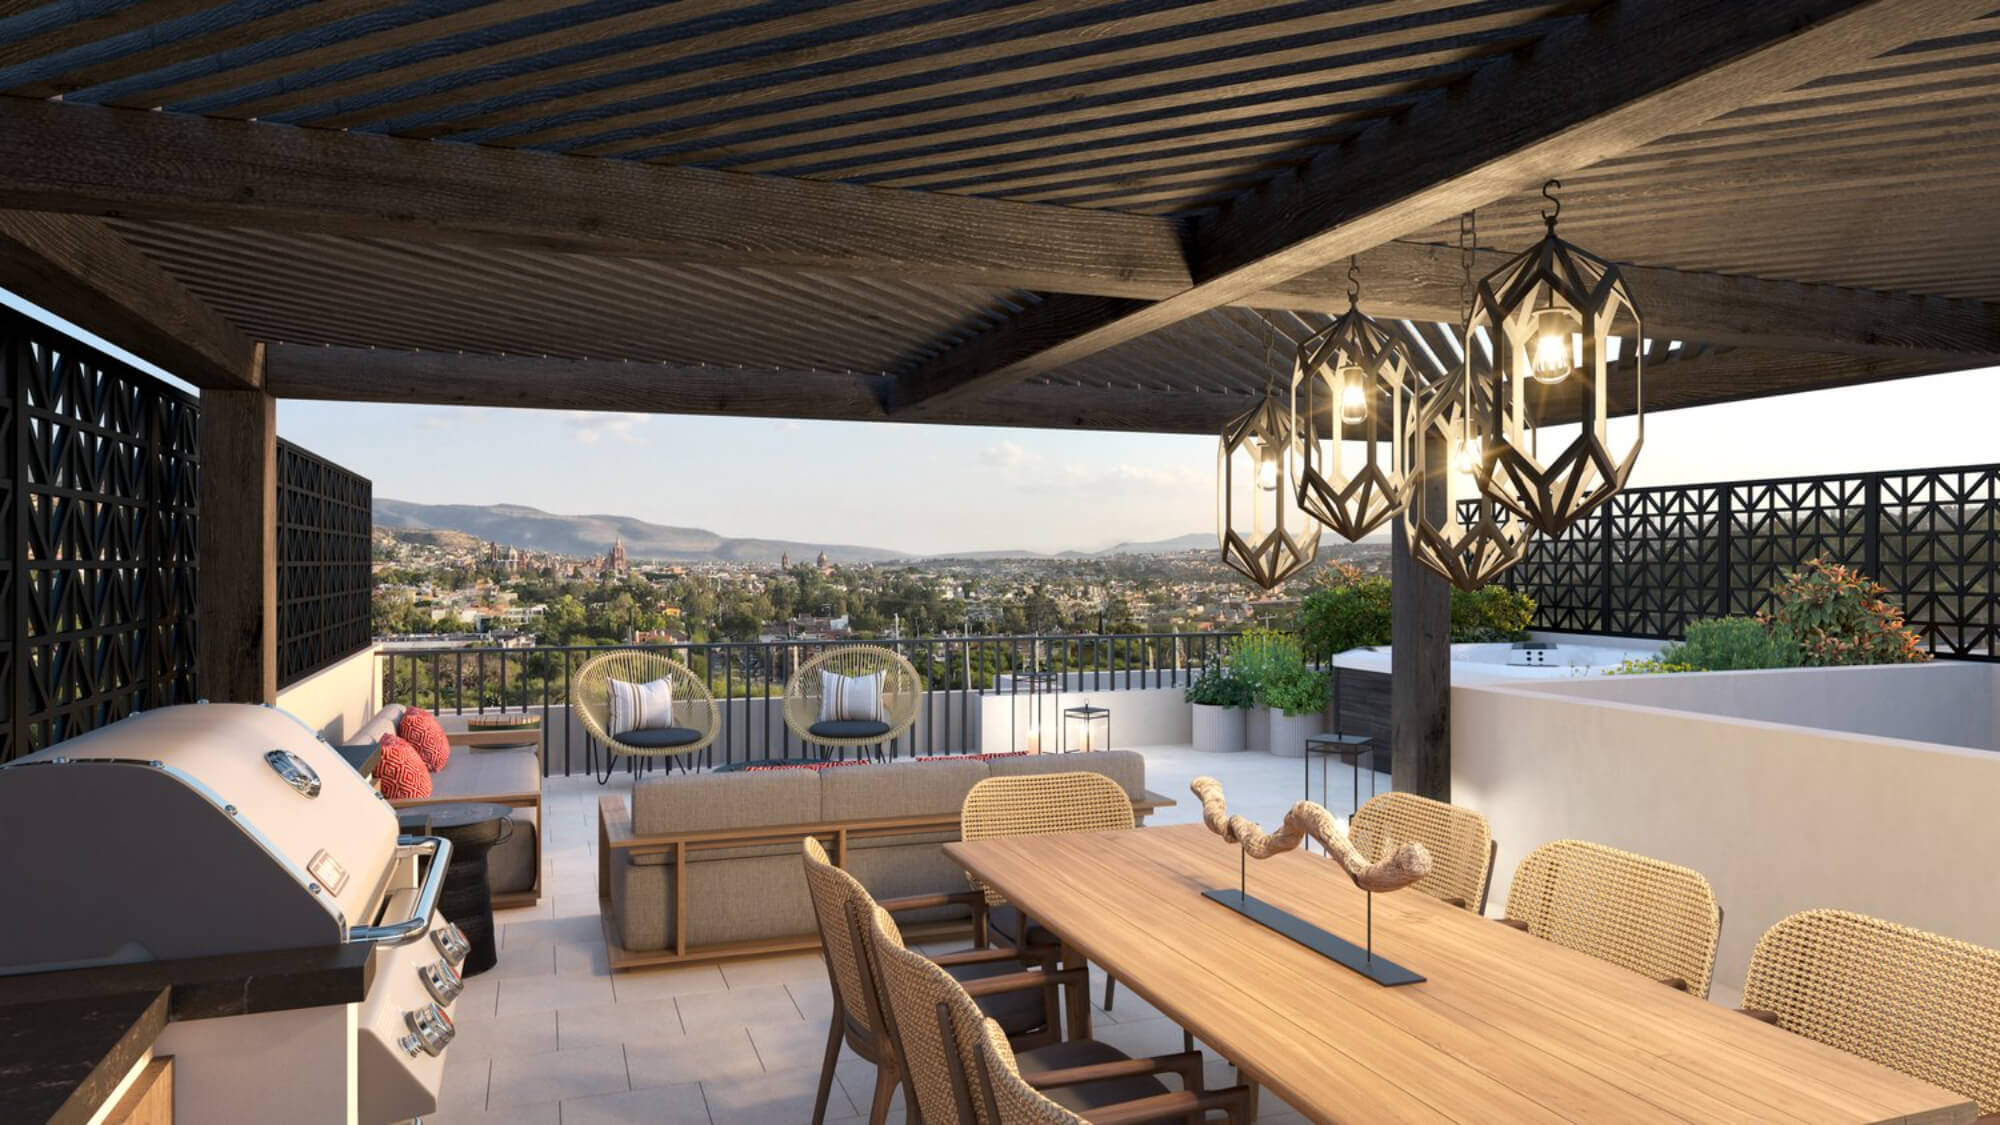 Penthouse with rooftop, jacuzzi, barbecue area, for sale San Miguel de Allende.